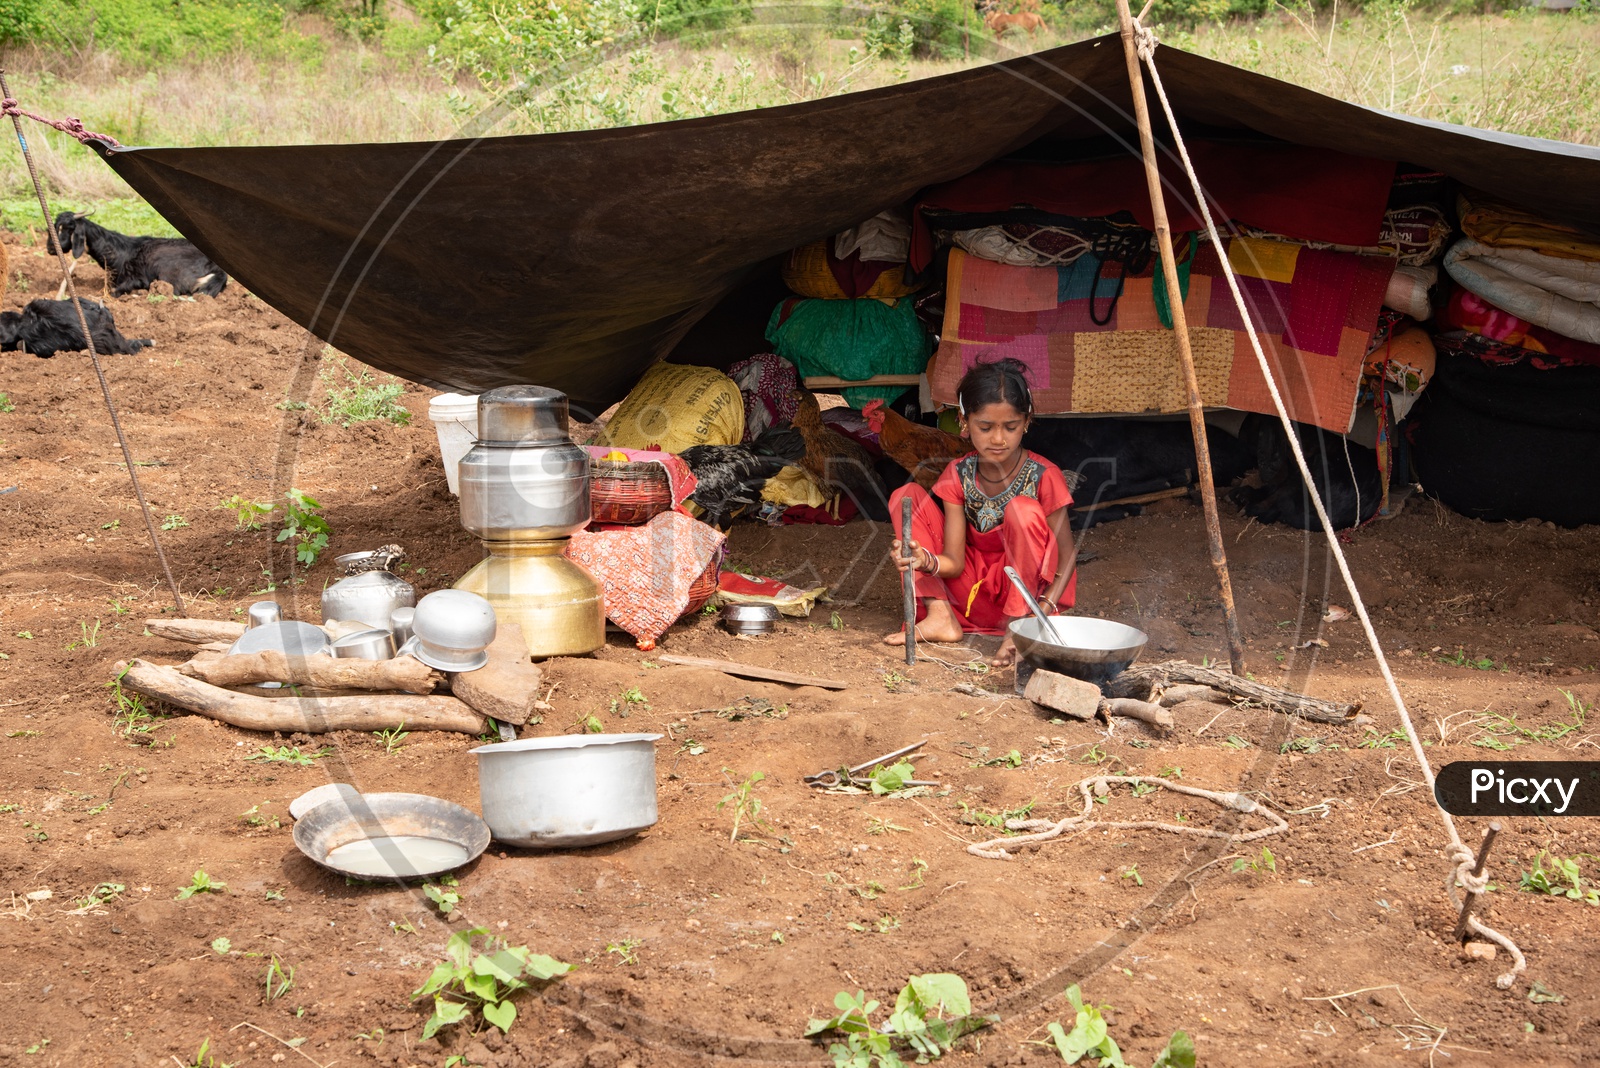 A little girls cooks meal for their family of shepherds in Maharashtra